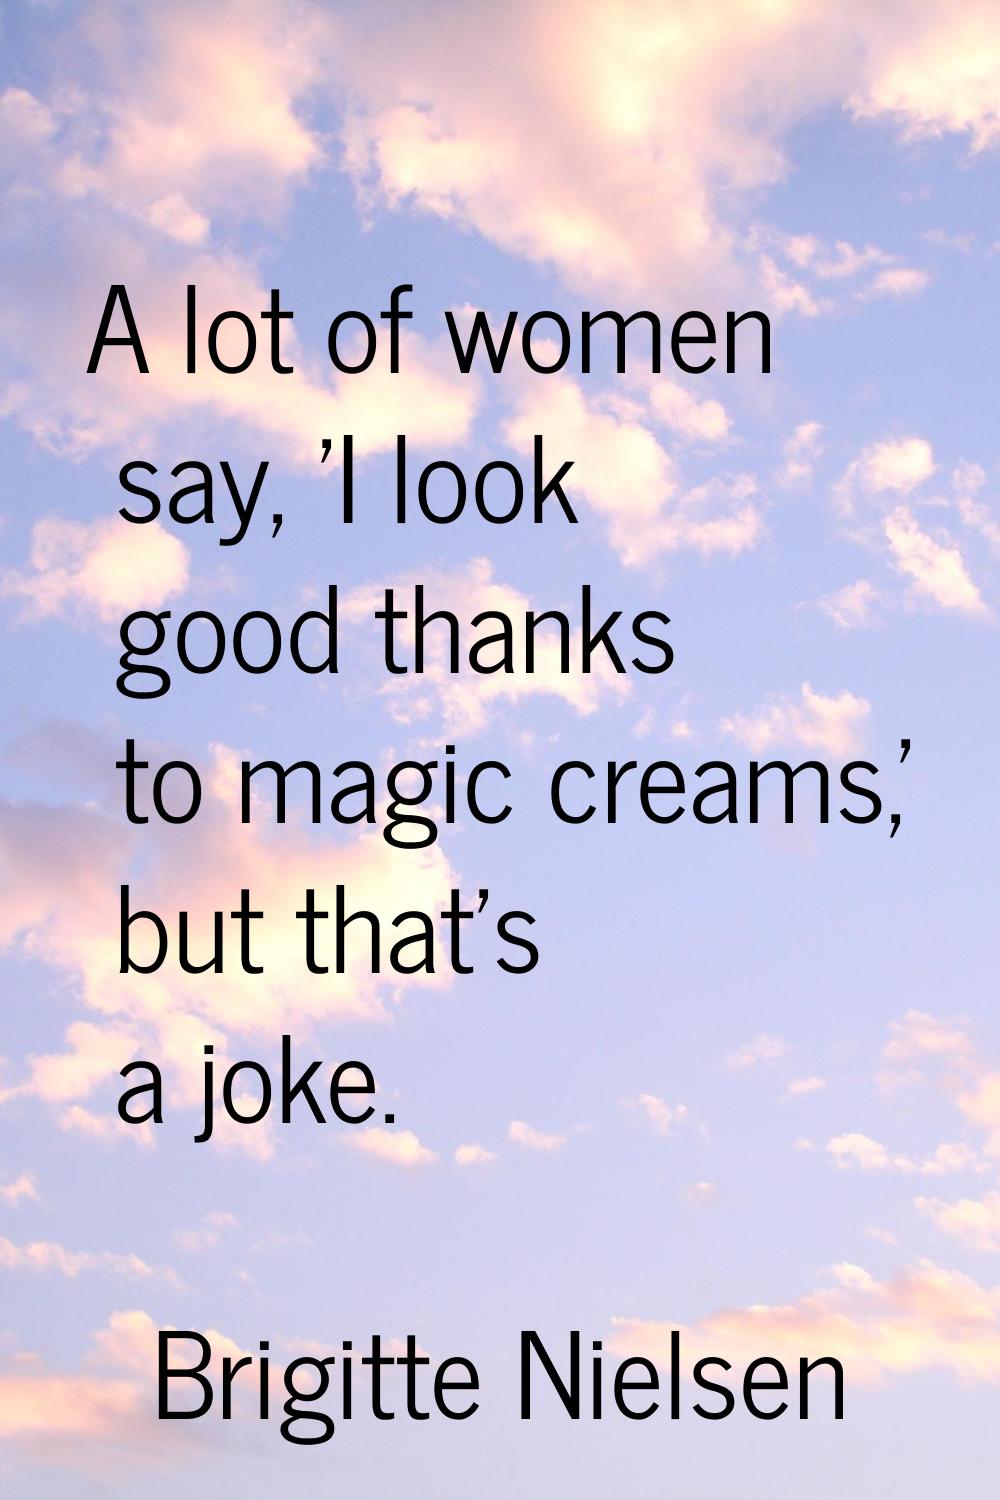 A lot of women say, 'I look good thanks to magic creams,' but that's a joke.